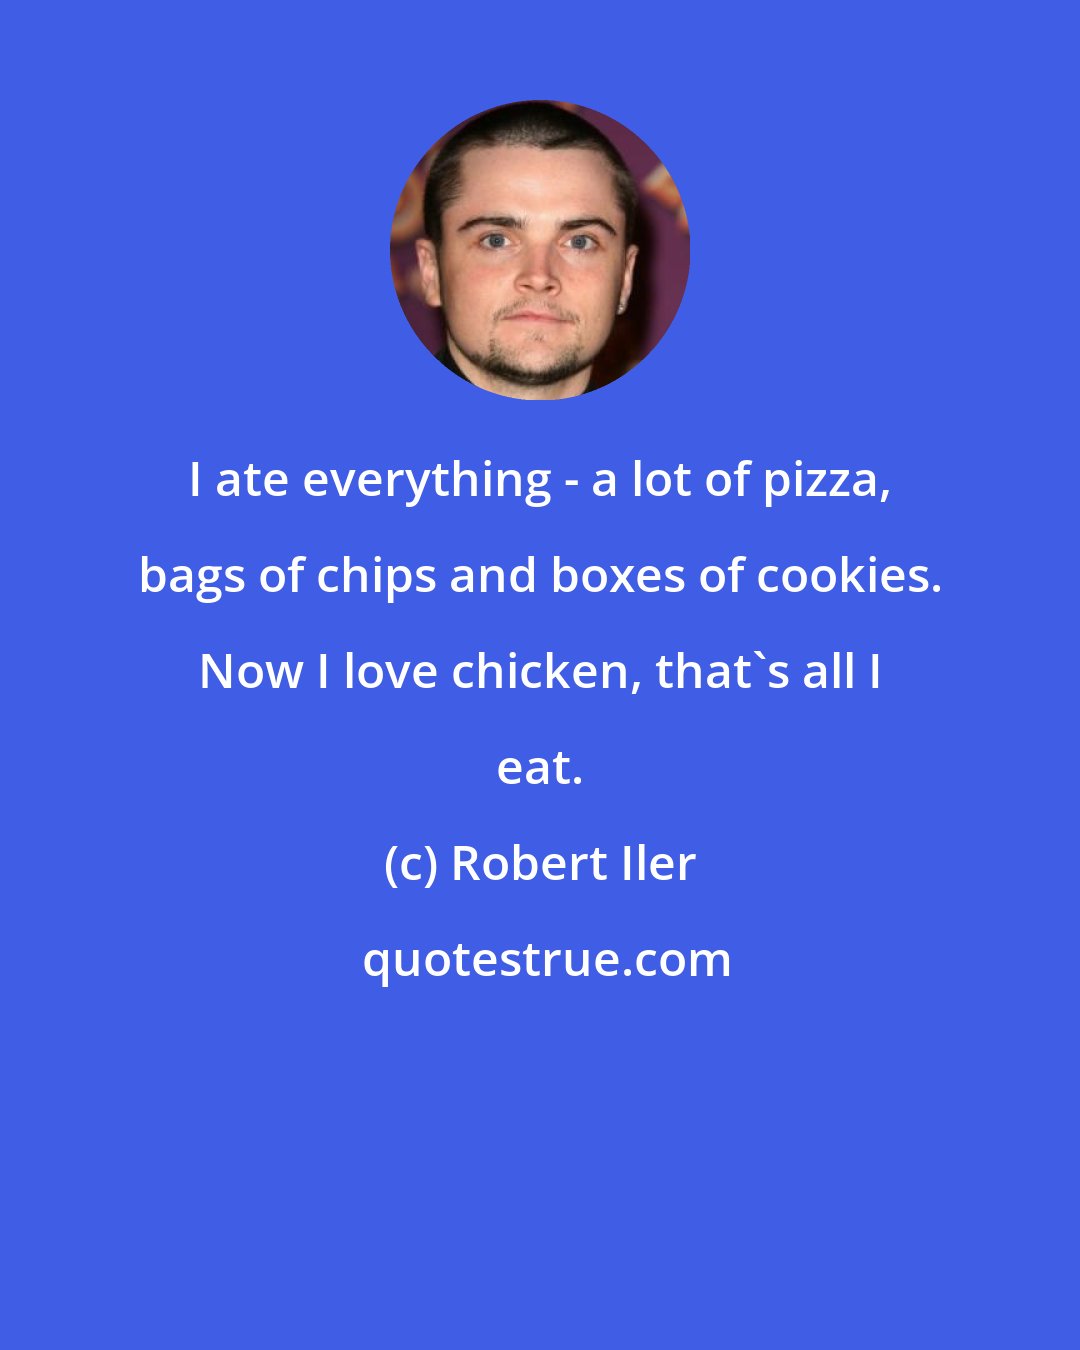 Robert Iler: I ate everything - a lot of pizza, bags of chips and boxes of cookies. Now I love chicken, that's all I eat.